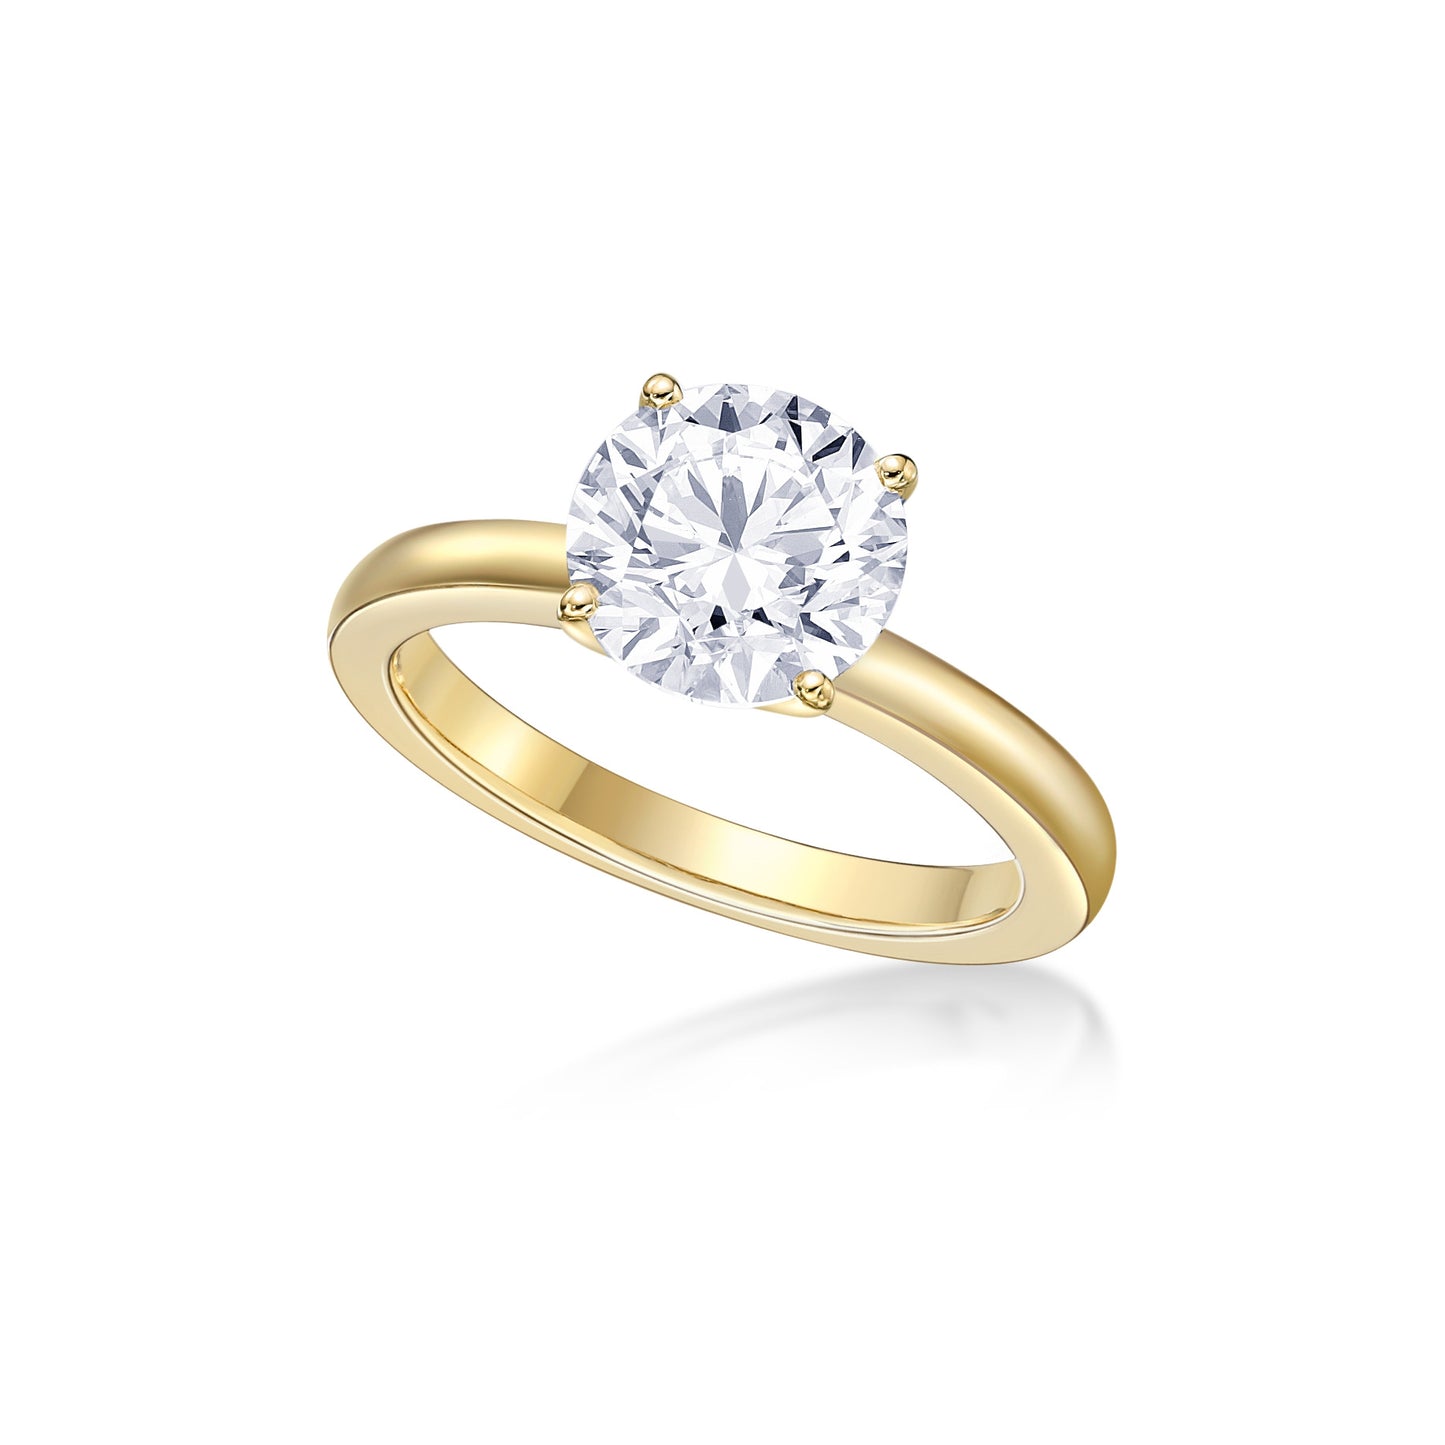 2ct Round Brilliant diamond in a handmade 18K Yellow Gold four-claw Crown Soitaire setting